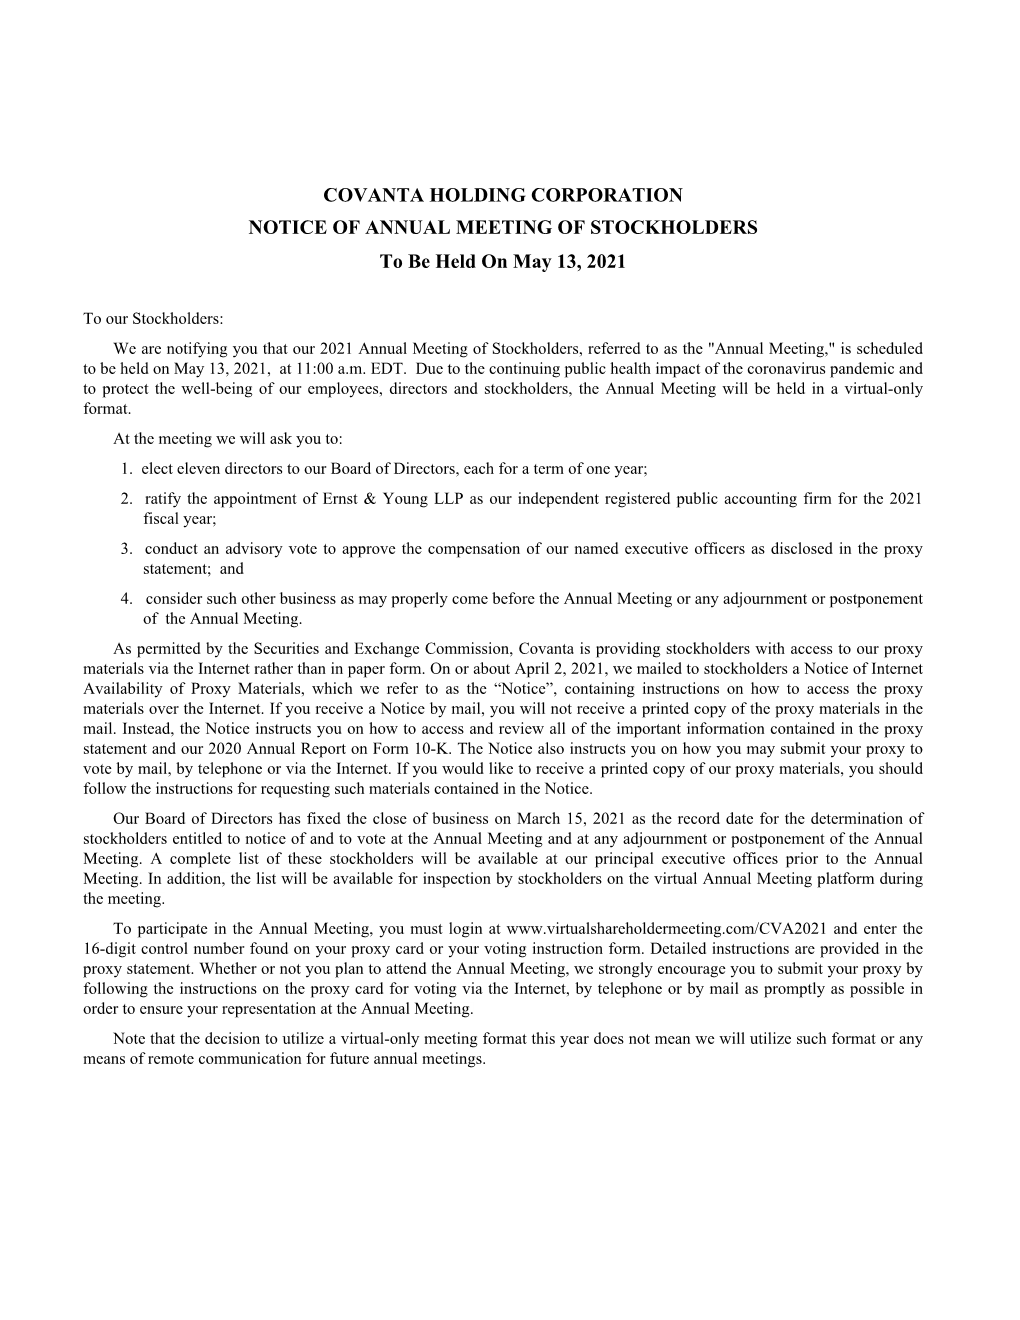 COVANTA HOLDING CORPORATION NOTICE of ANNUAL MEETING of STOCKHOLDERS to Be Held on May 13, 2021